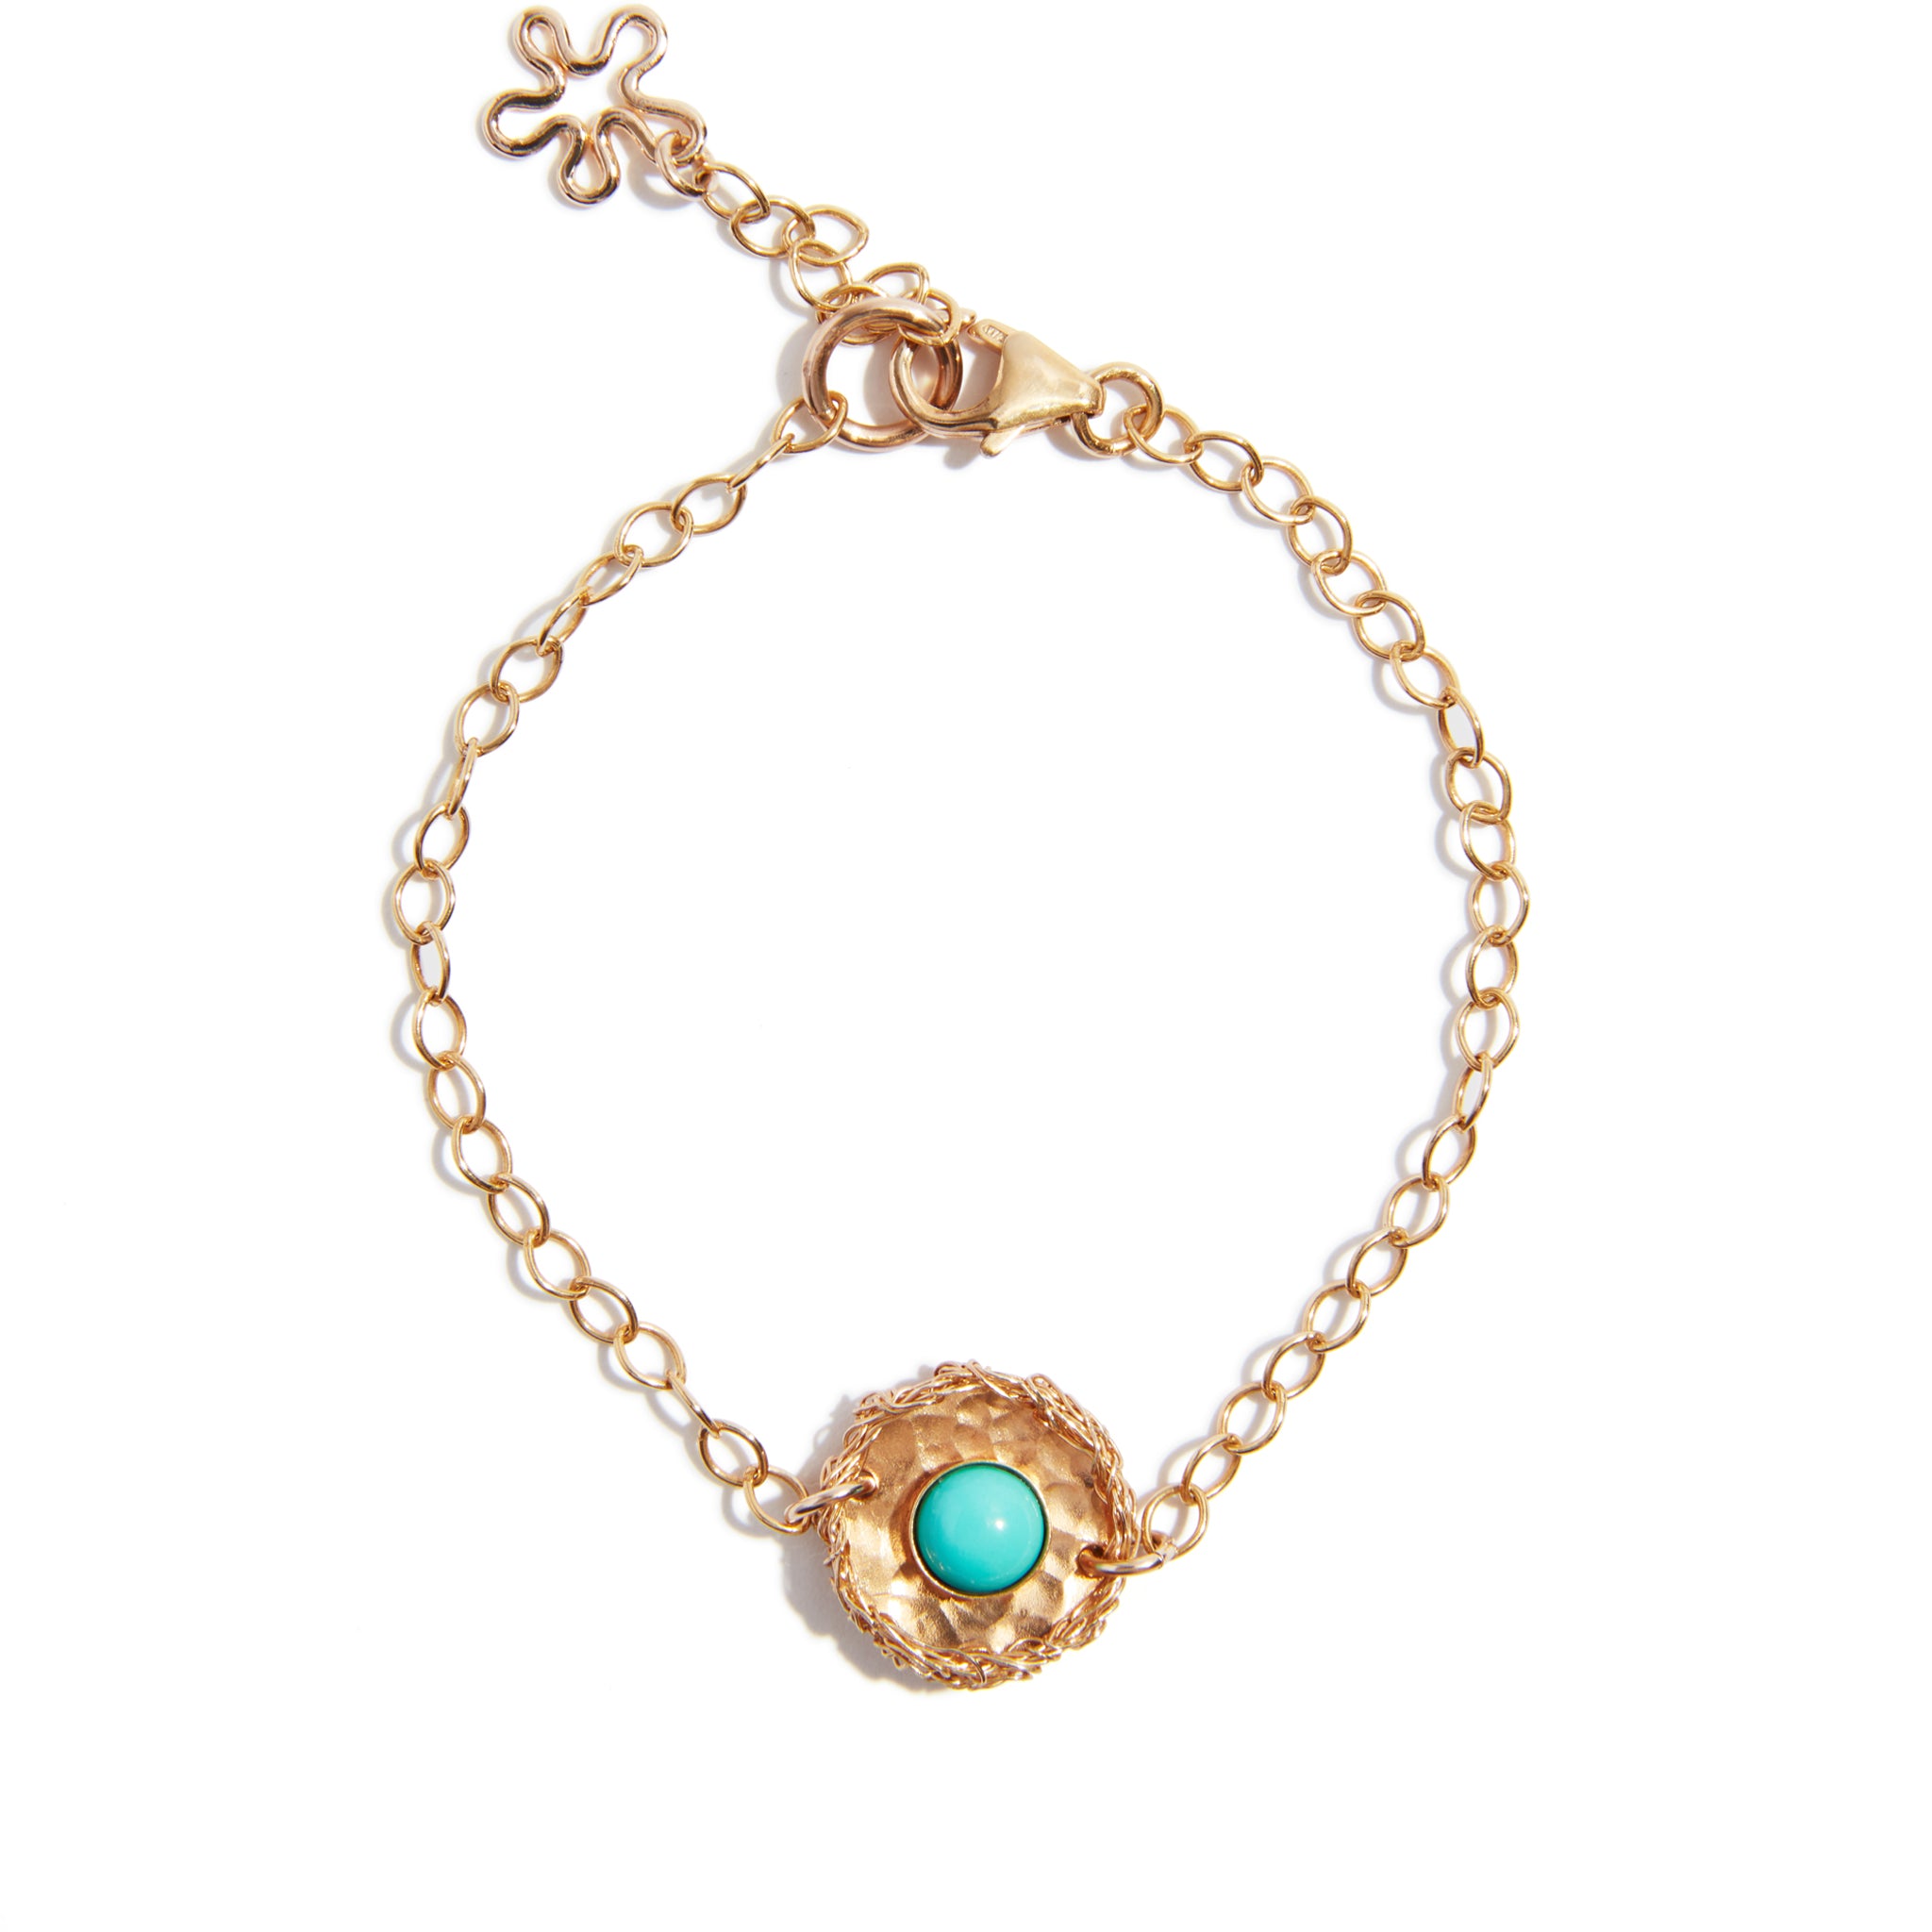 Discover our stylish adjustable chain made of 14ct gold fill featuring a turquoise stone on our classic hammered and crochet design, adding a pop of colour and style to any outfit.